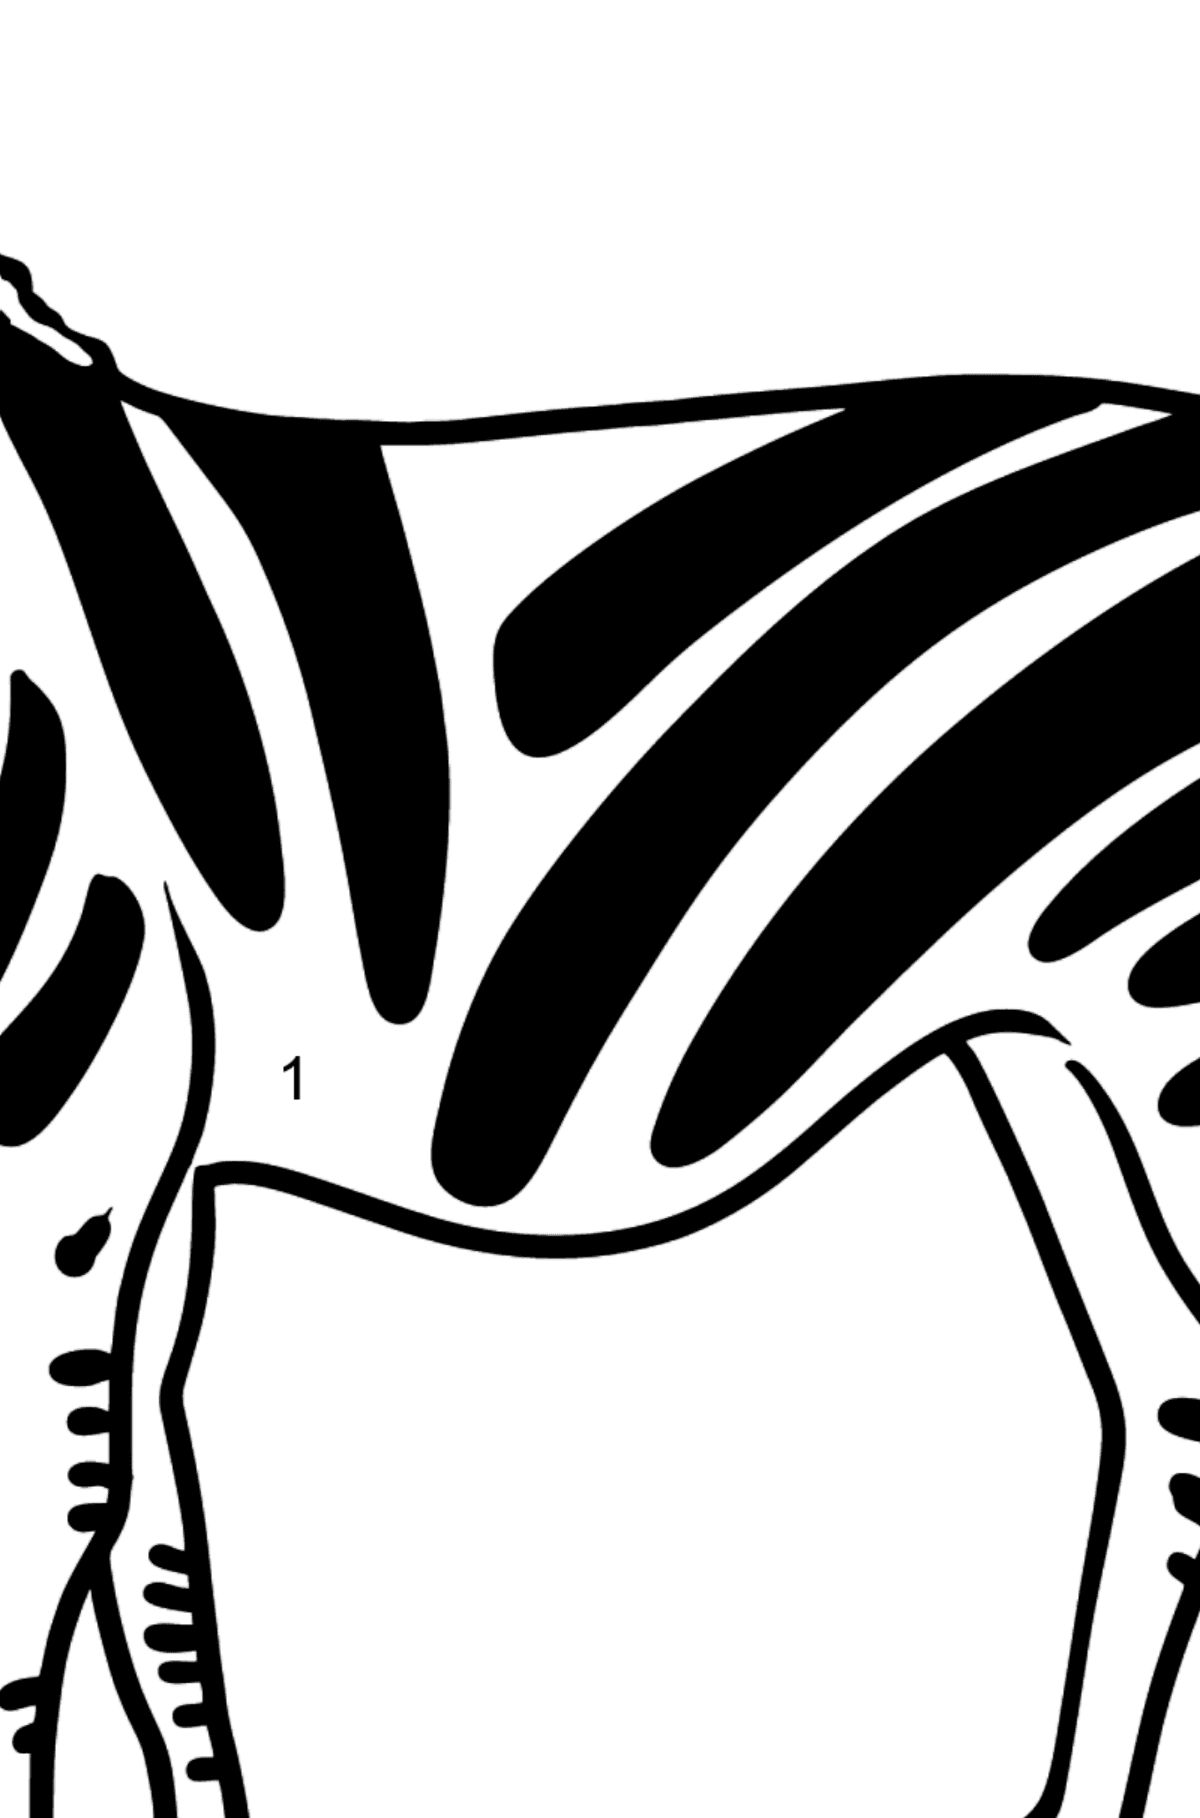 Zebra coloring page - Coloring by Numbers for Kids